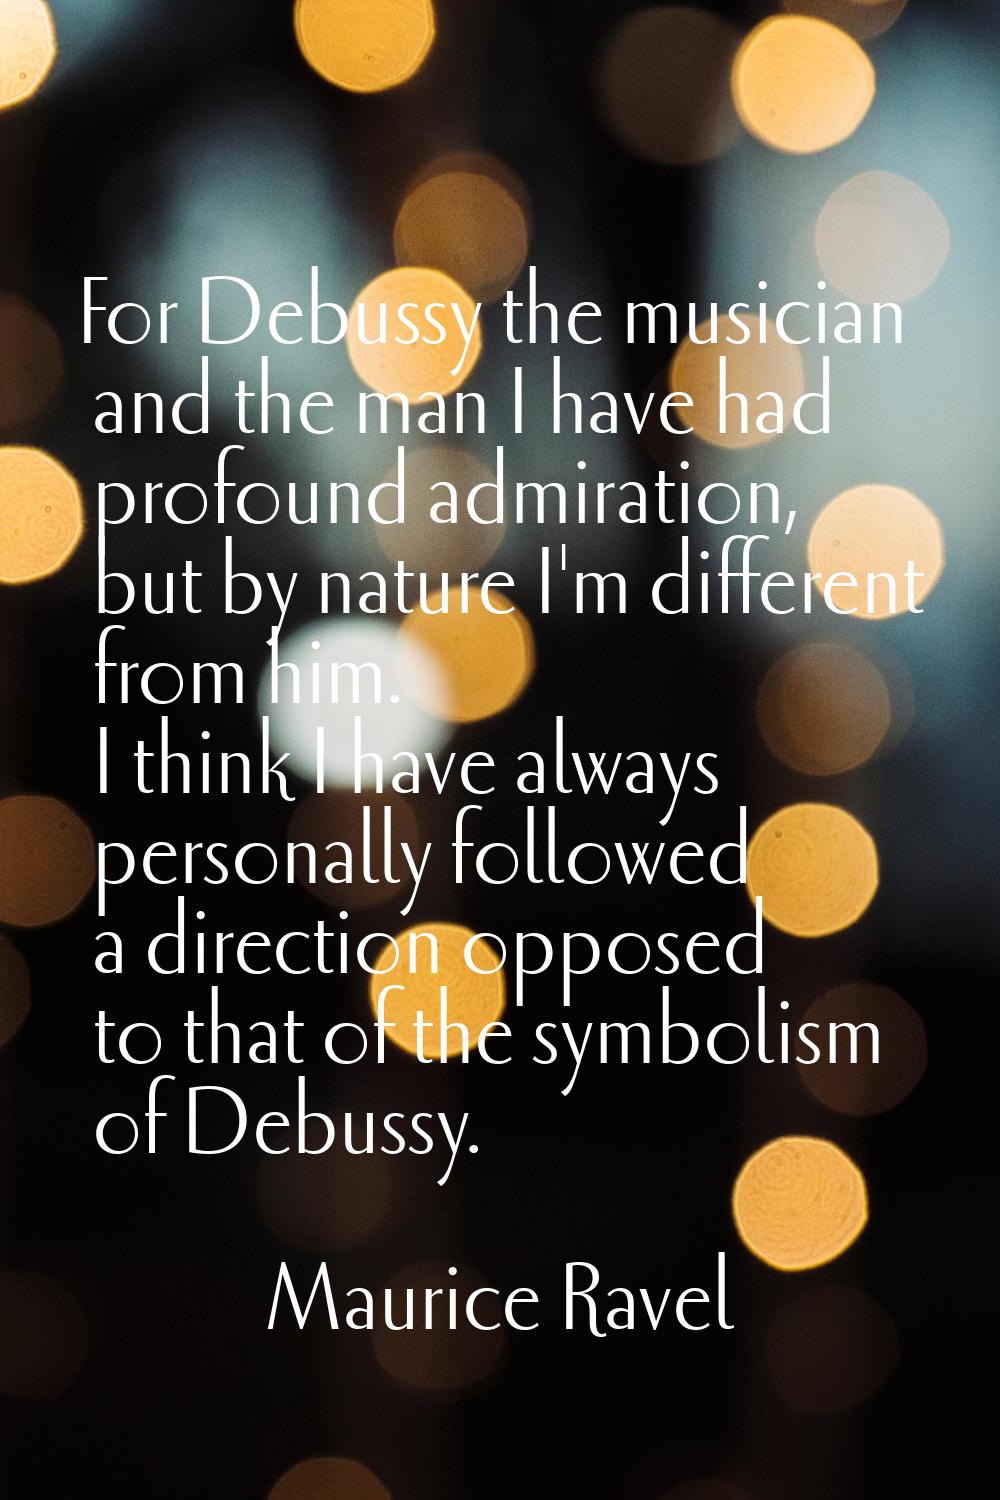 For Debussy the musician and the man I have had profound admiration, but by nature I'm different fr